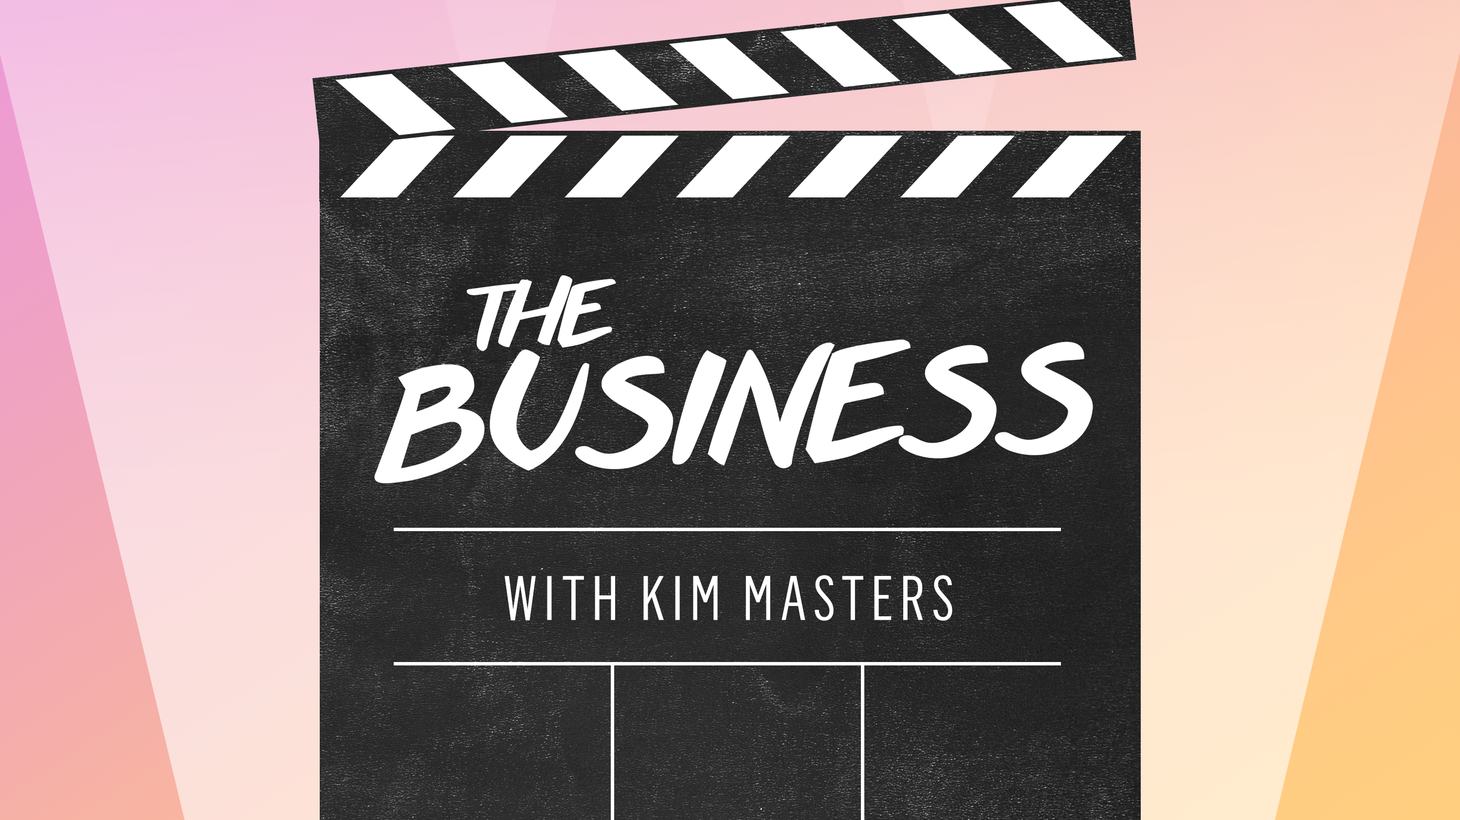 We have interesting guests on The Business, and sometimes our conversations are too long to fit into one show. This week we give you stories that were too good to leave on the cutting room floor, including some sharp insights on making it in the industry from David Mandel, David Simon, Shawn Levy and Matt Reeves.